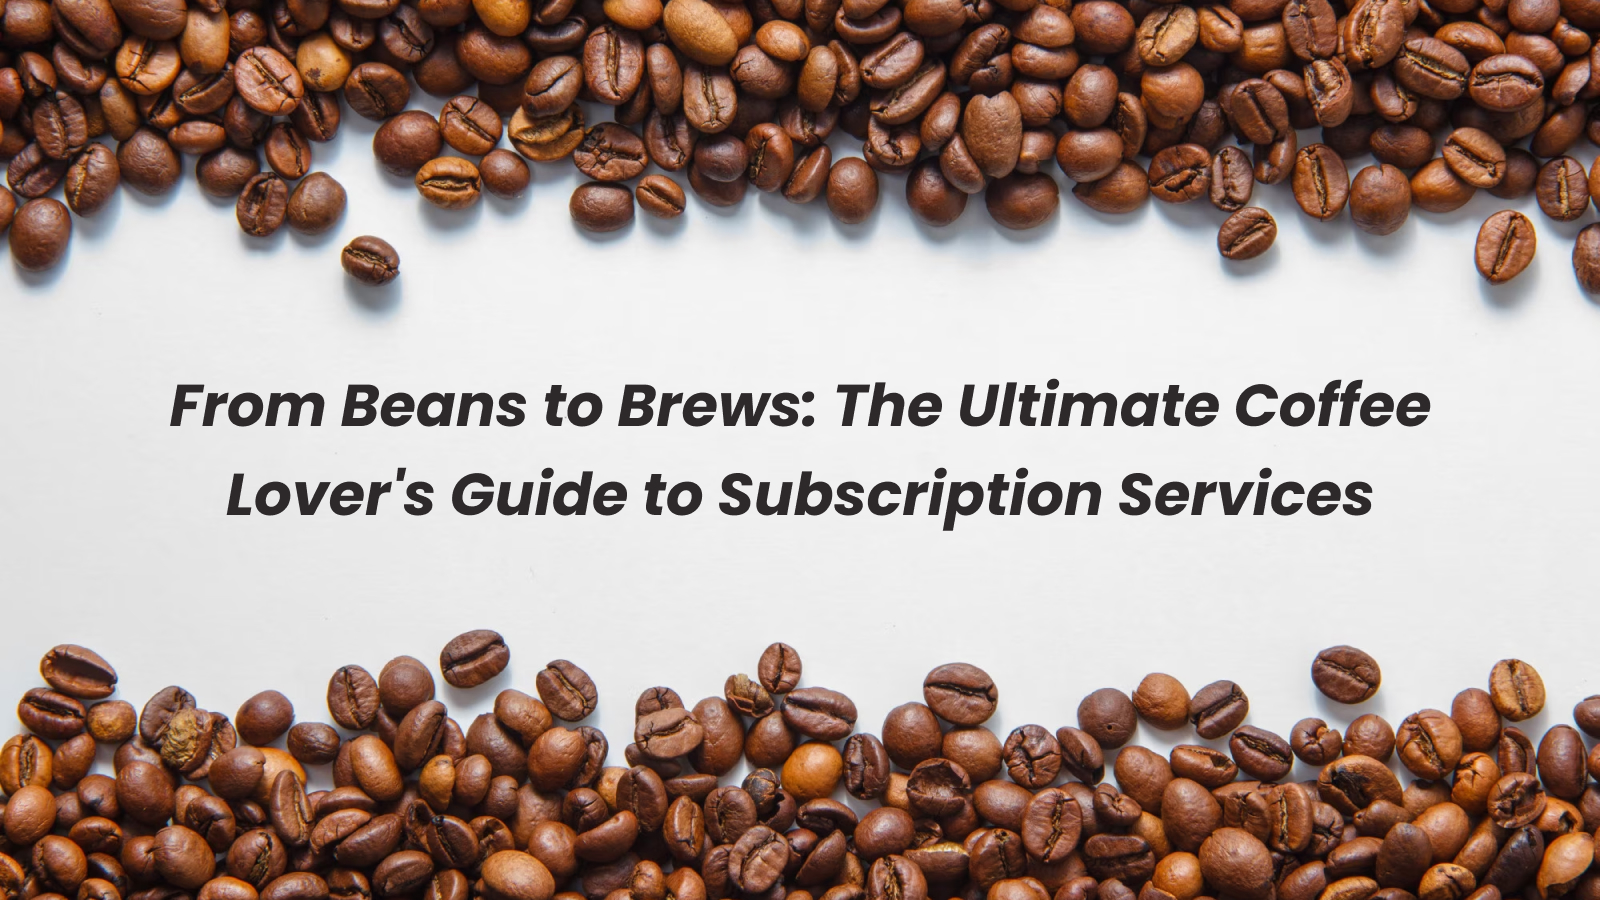 
From Beans to Brews: The Ultimate Coffee Lover’s Guide to Subscription Services